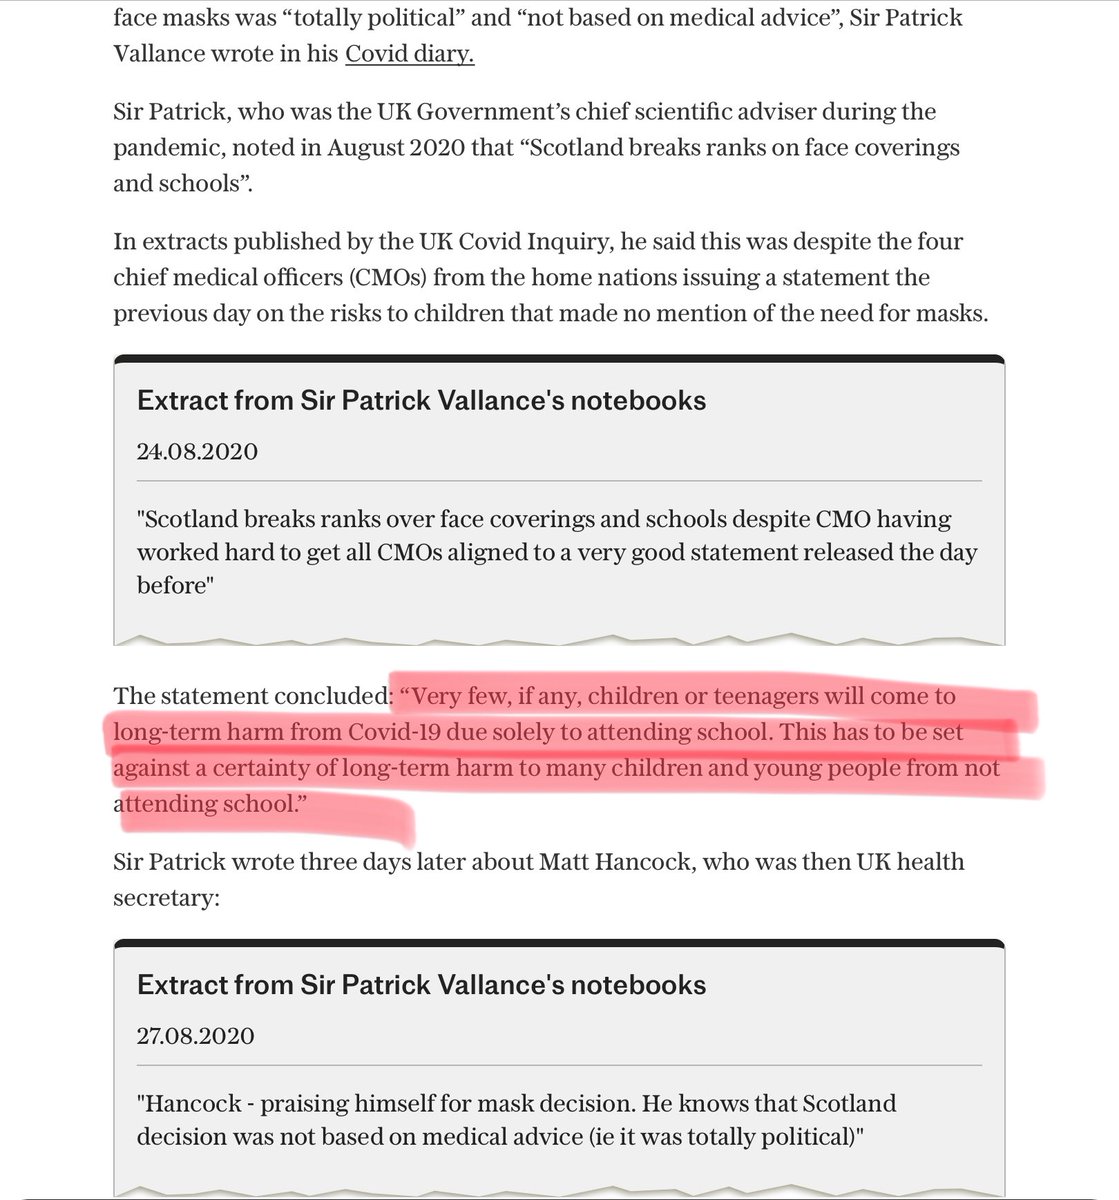 Absolutely astonishing from Patrick Vallance: “Very few, if any, children or teenagers will come to long-term harm from Covid-19 due solely to attending school.” In September 2021 when the UK’s Chief Medical Officers overrode the UK’s expert vaccine advisory committee to push…